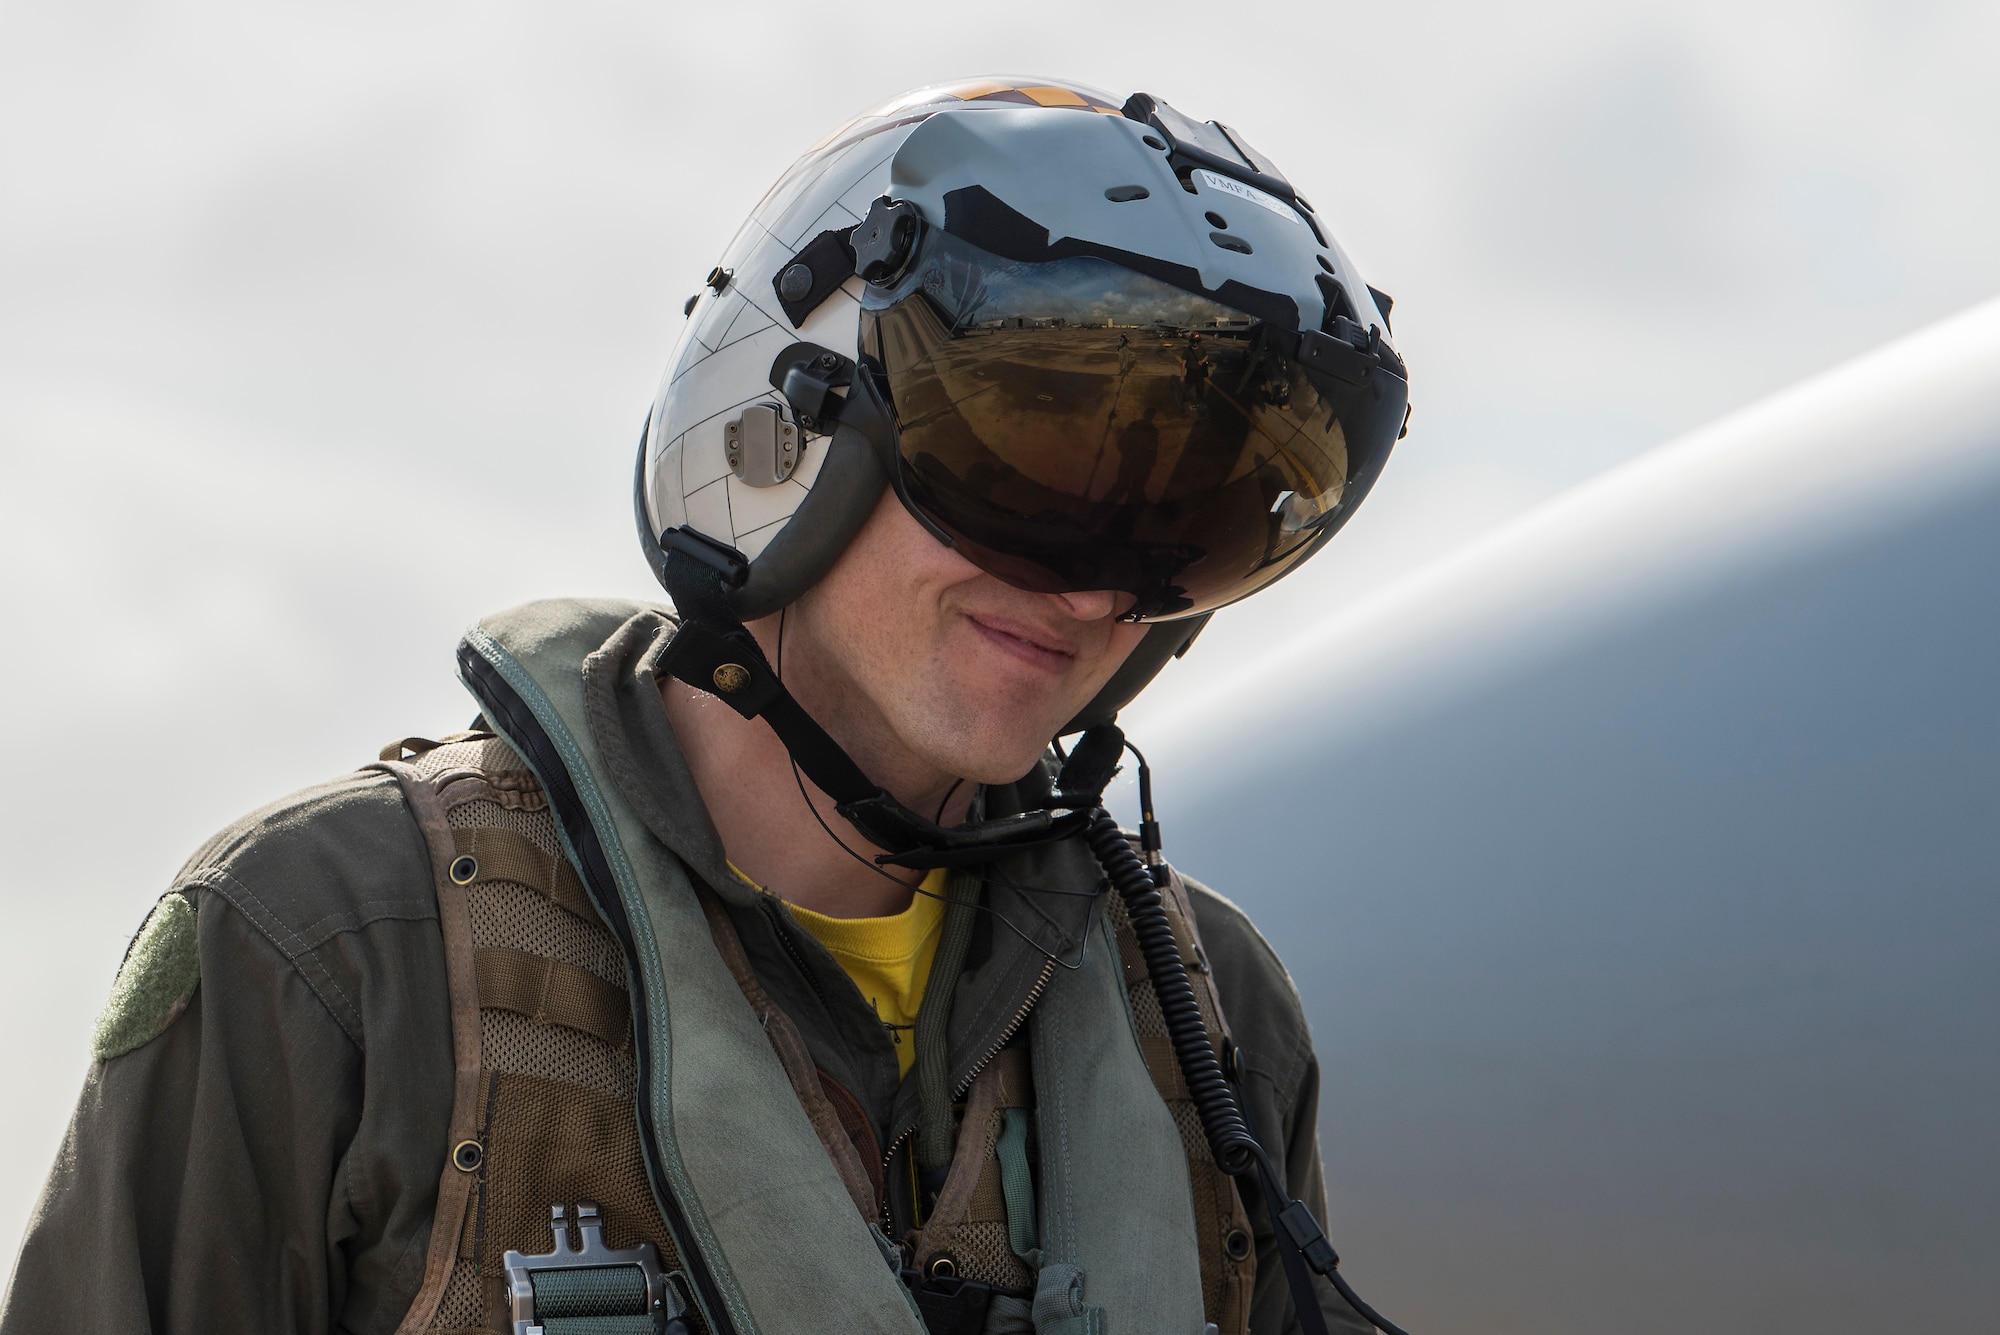 U.S. Marine Corps Maj. Matthew Andrews, 323nd Marine Fighter Attack Squadron pilot, walks to an F/A-18C Hornet during joint exercise Winter Fury at Marine Corps Air Station Miramar, San Diego, Calif., Jan. 18, 2019. Winter Fury involved both Marine F/A-18C Hornets, and Navy F-35C Lightning II’s, partnering with Air Force F-22 Raptors to perform air-to-air combat, while protecting ground assets.